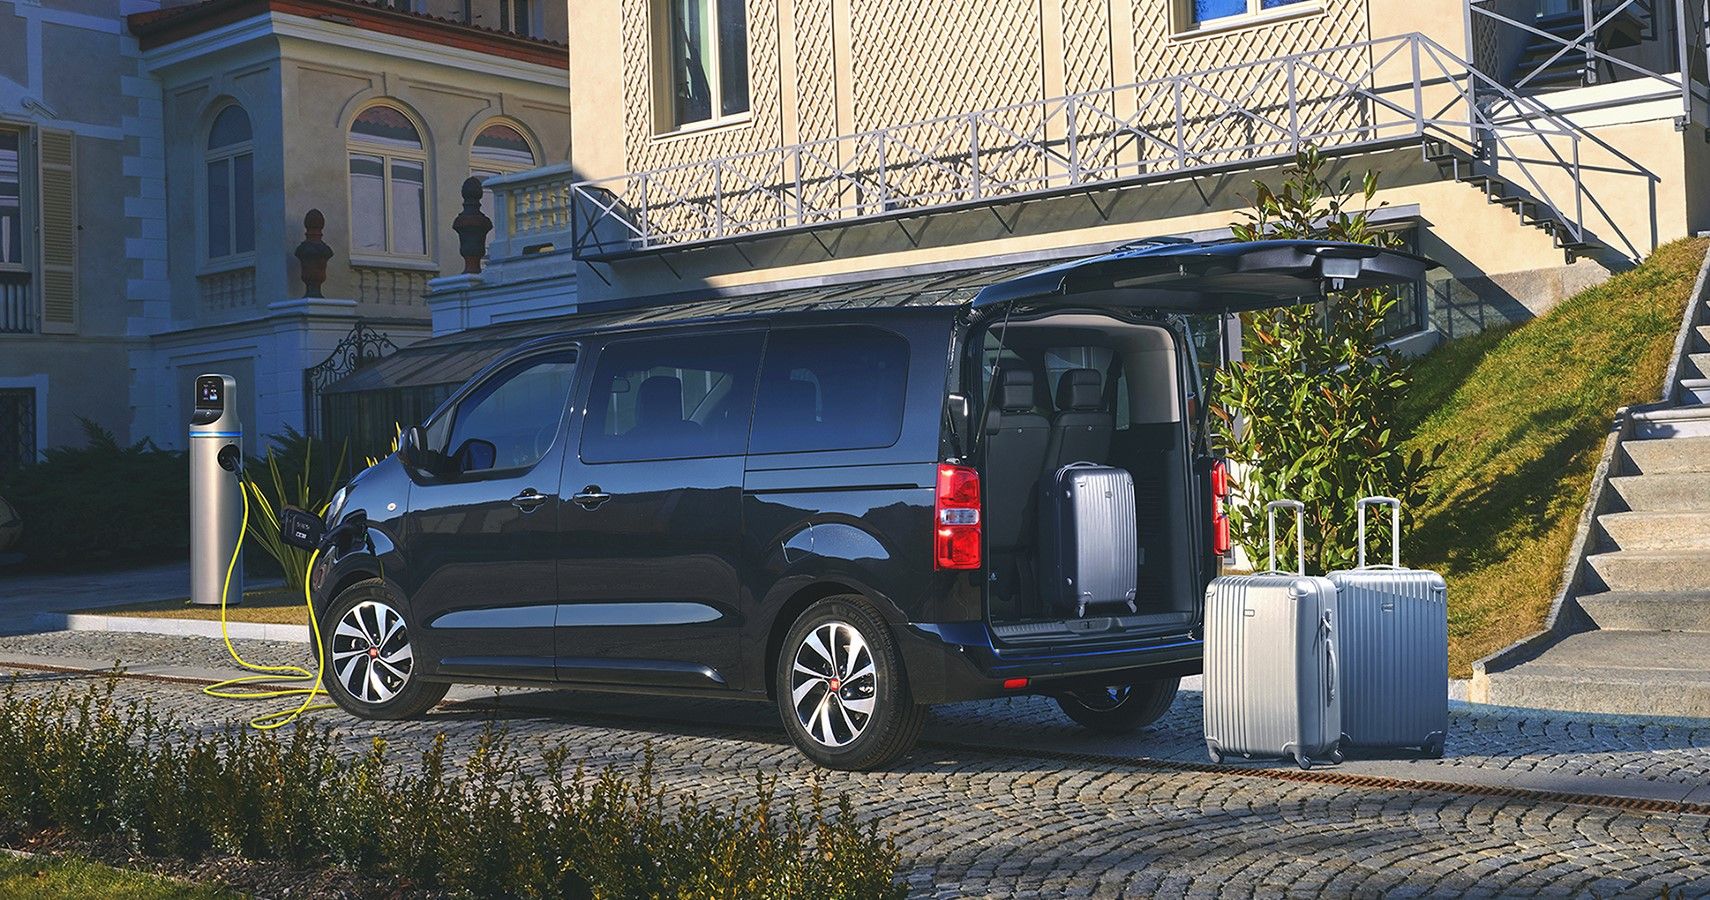 2022 Fiat E-Ulysse rear third quarter view at charging station